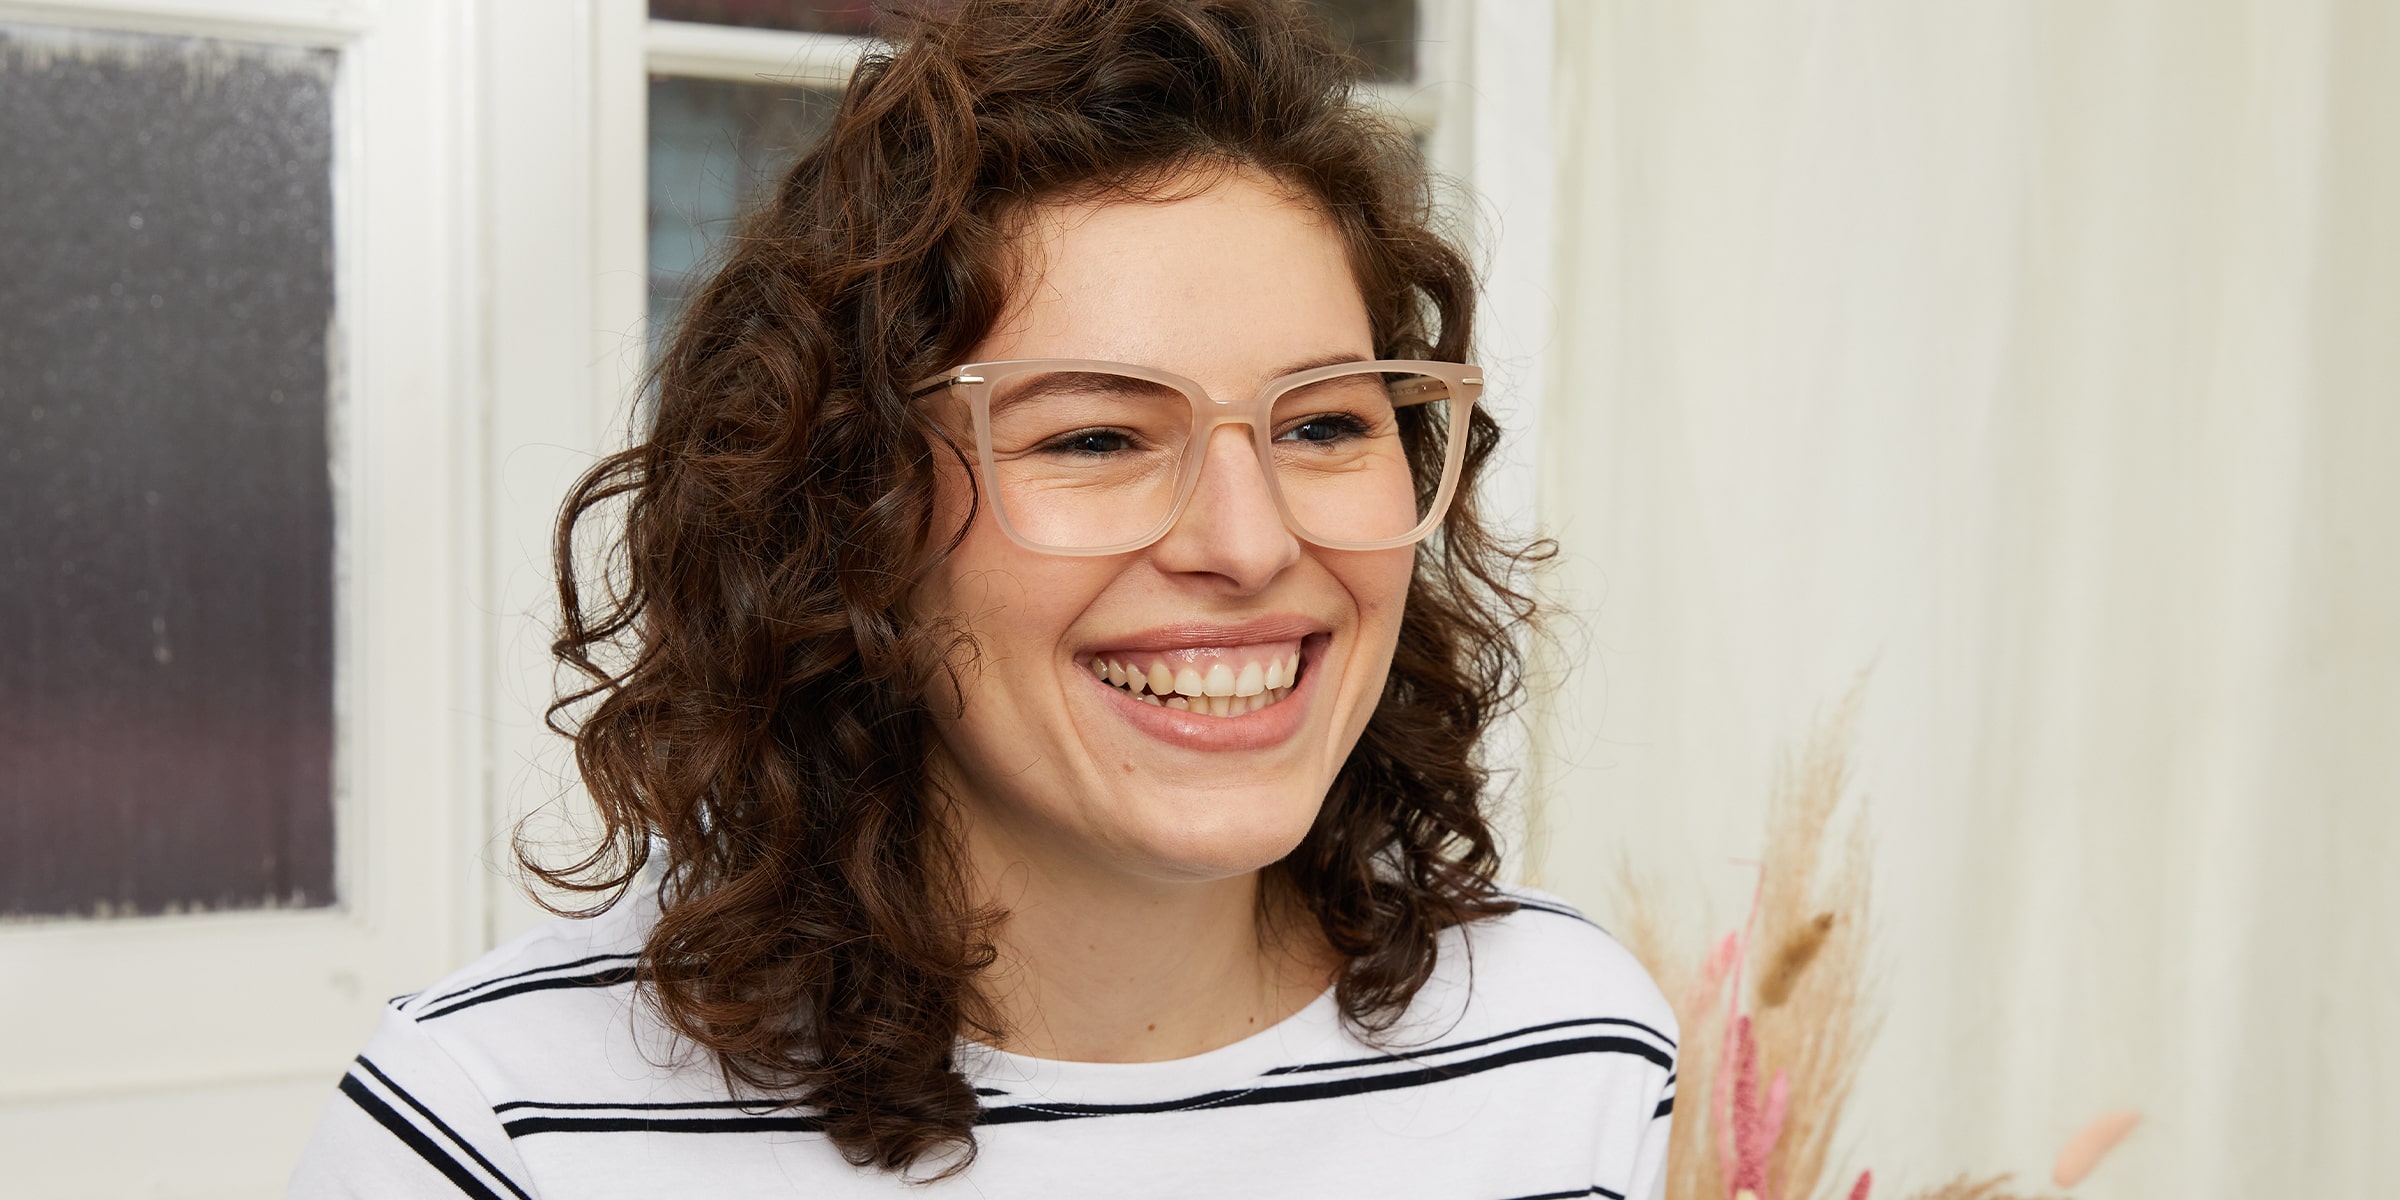 Smiling woman with curly brown hair wearing large, nude-coloured cat-eye glasses